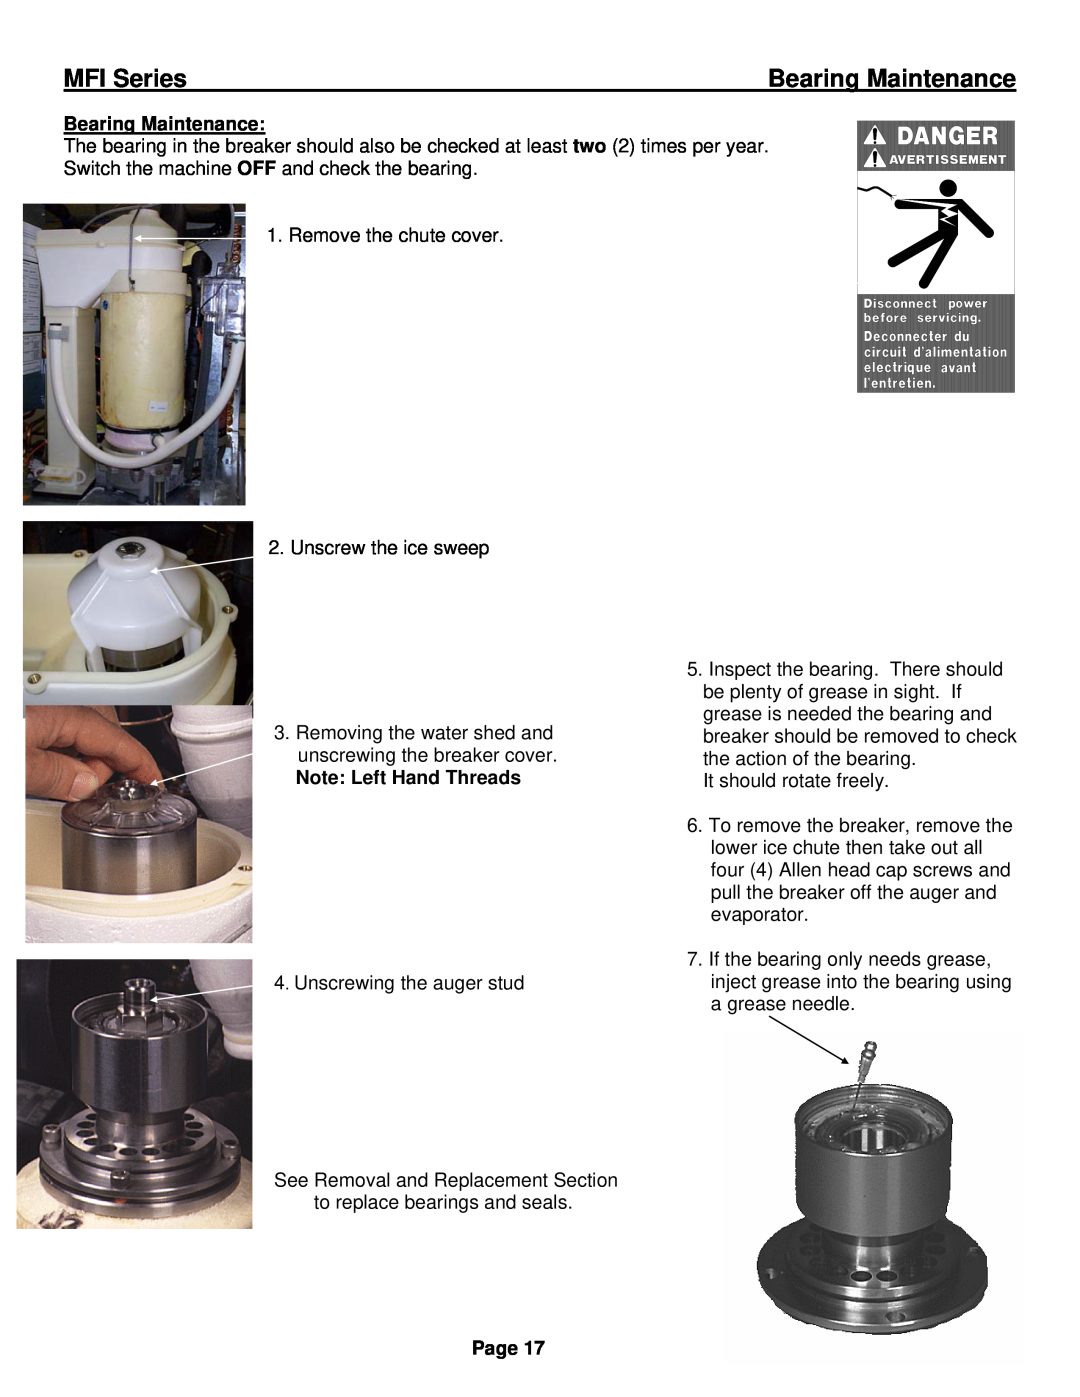 Ice-O-Matic installation manual Bearing Maintenance, Note Left Hand Threads, MFI Series, Page 